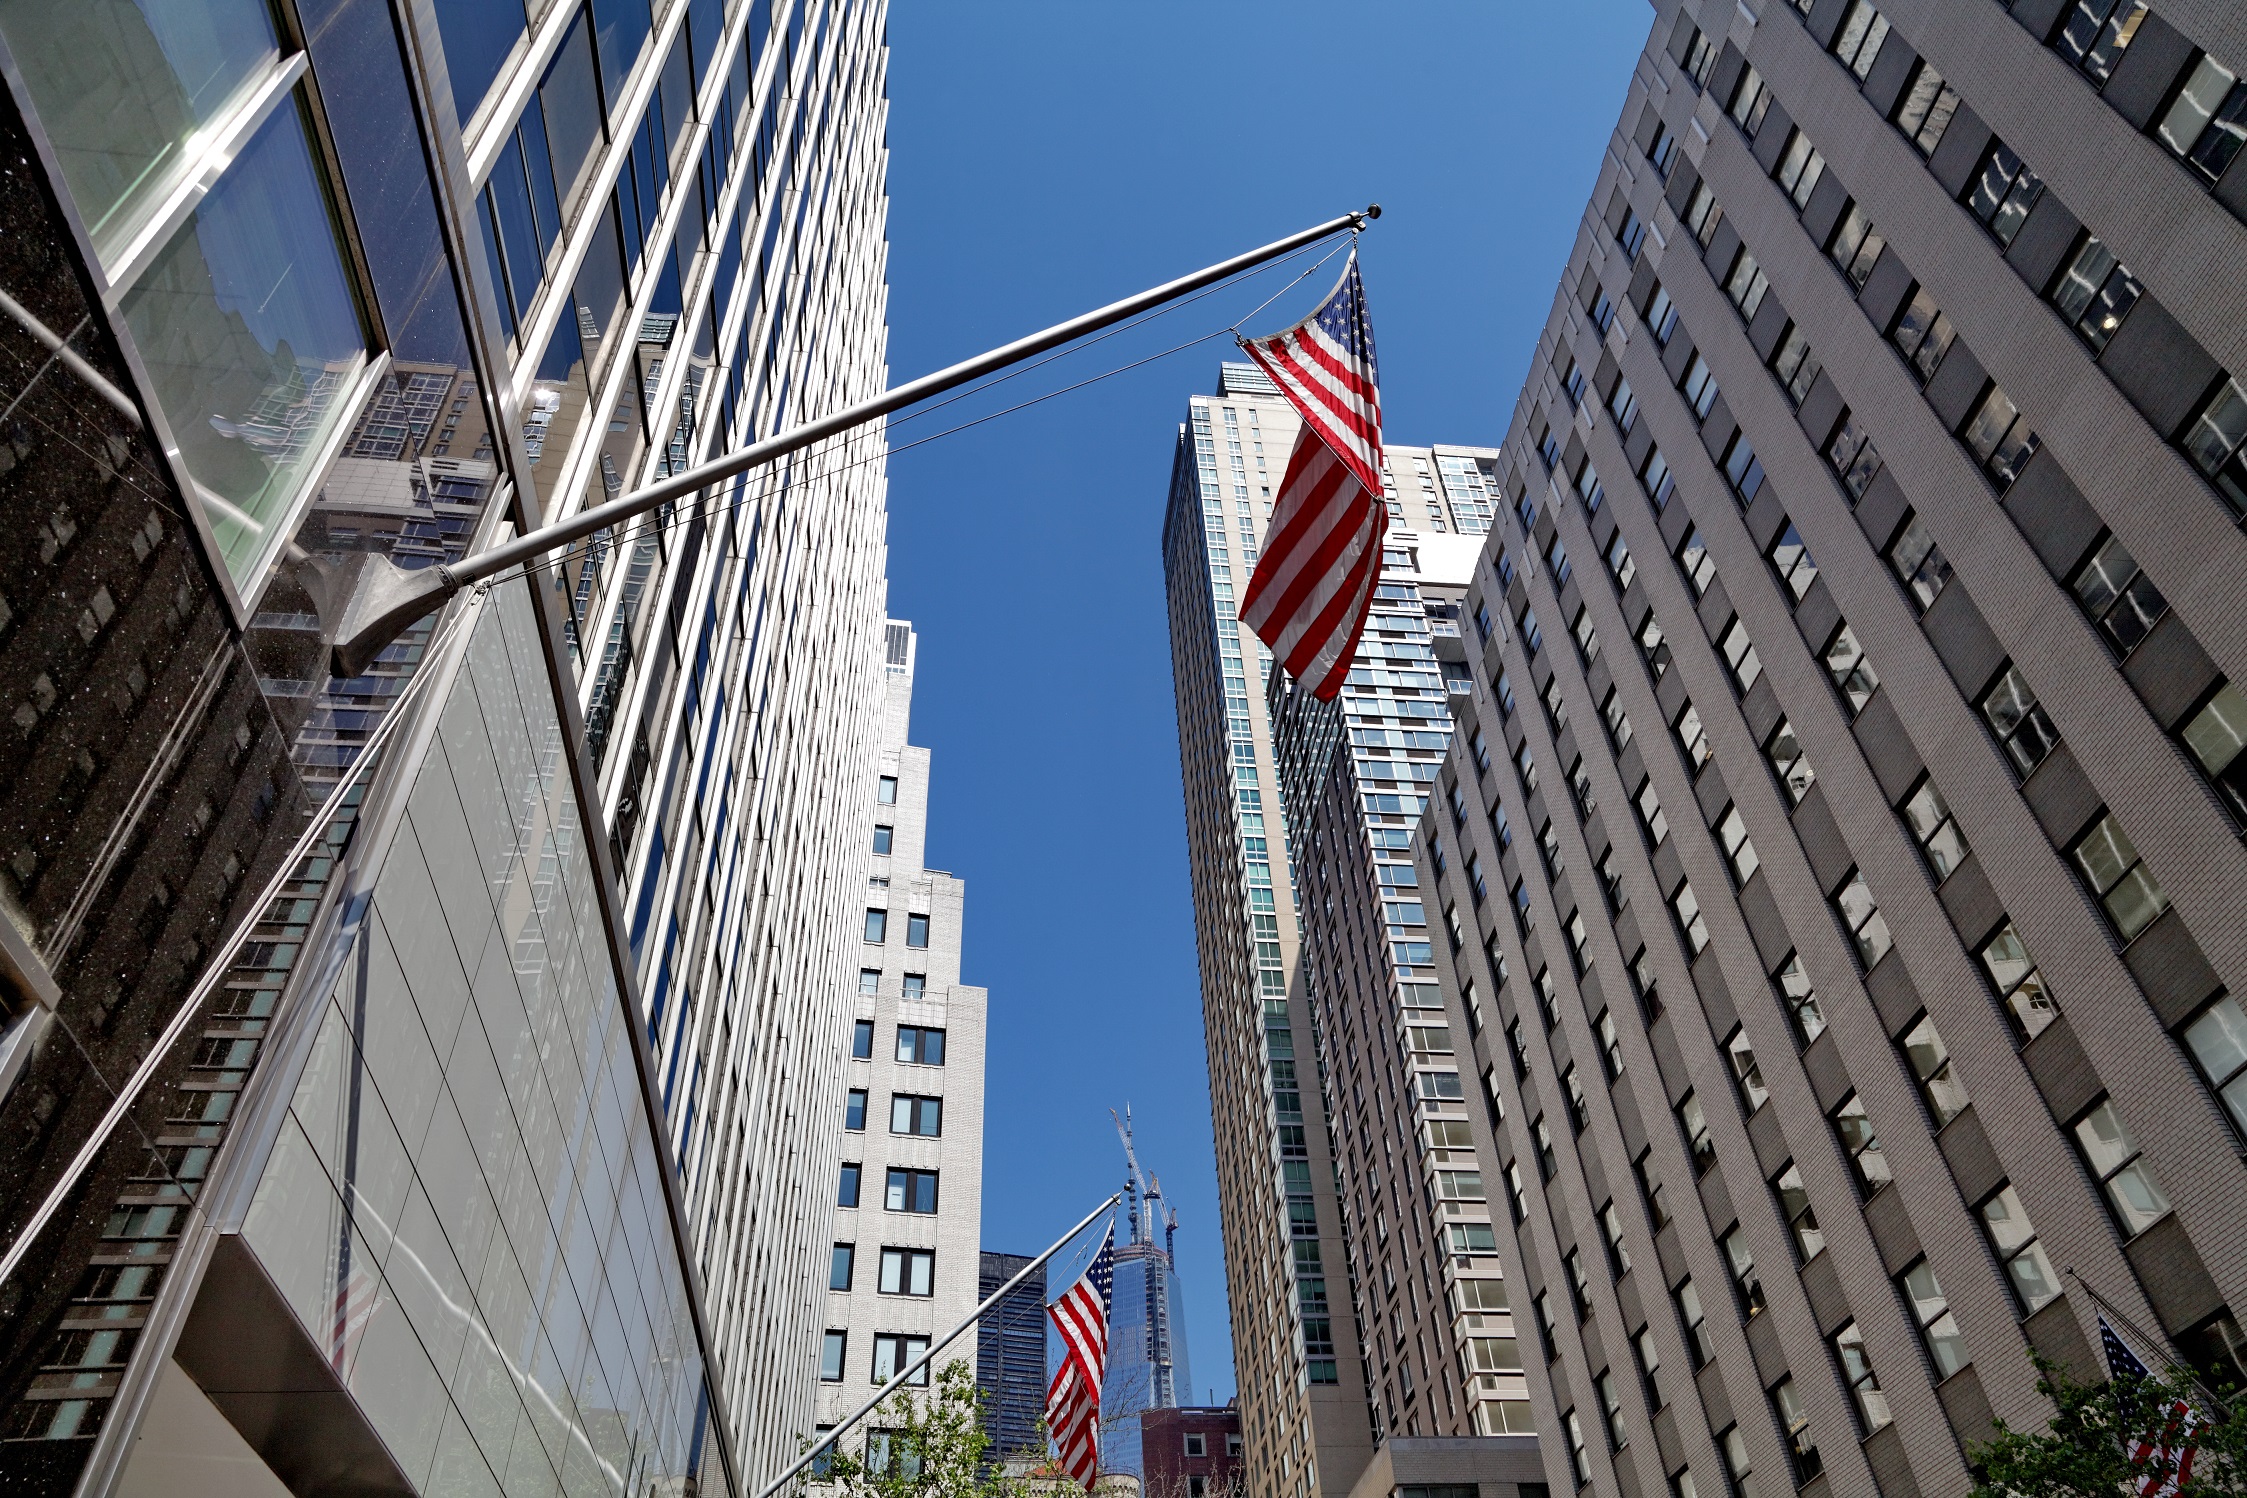 Blocks of Tall Office Buildings Pictured from Below Looking Up with Flagpoles with American Flags Protruding from Them